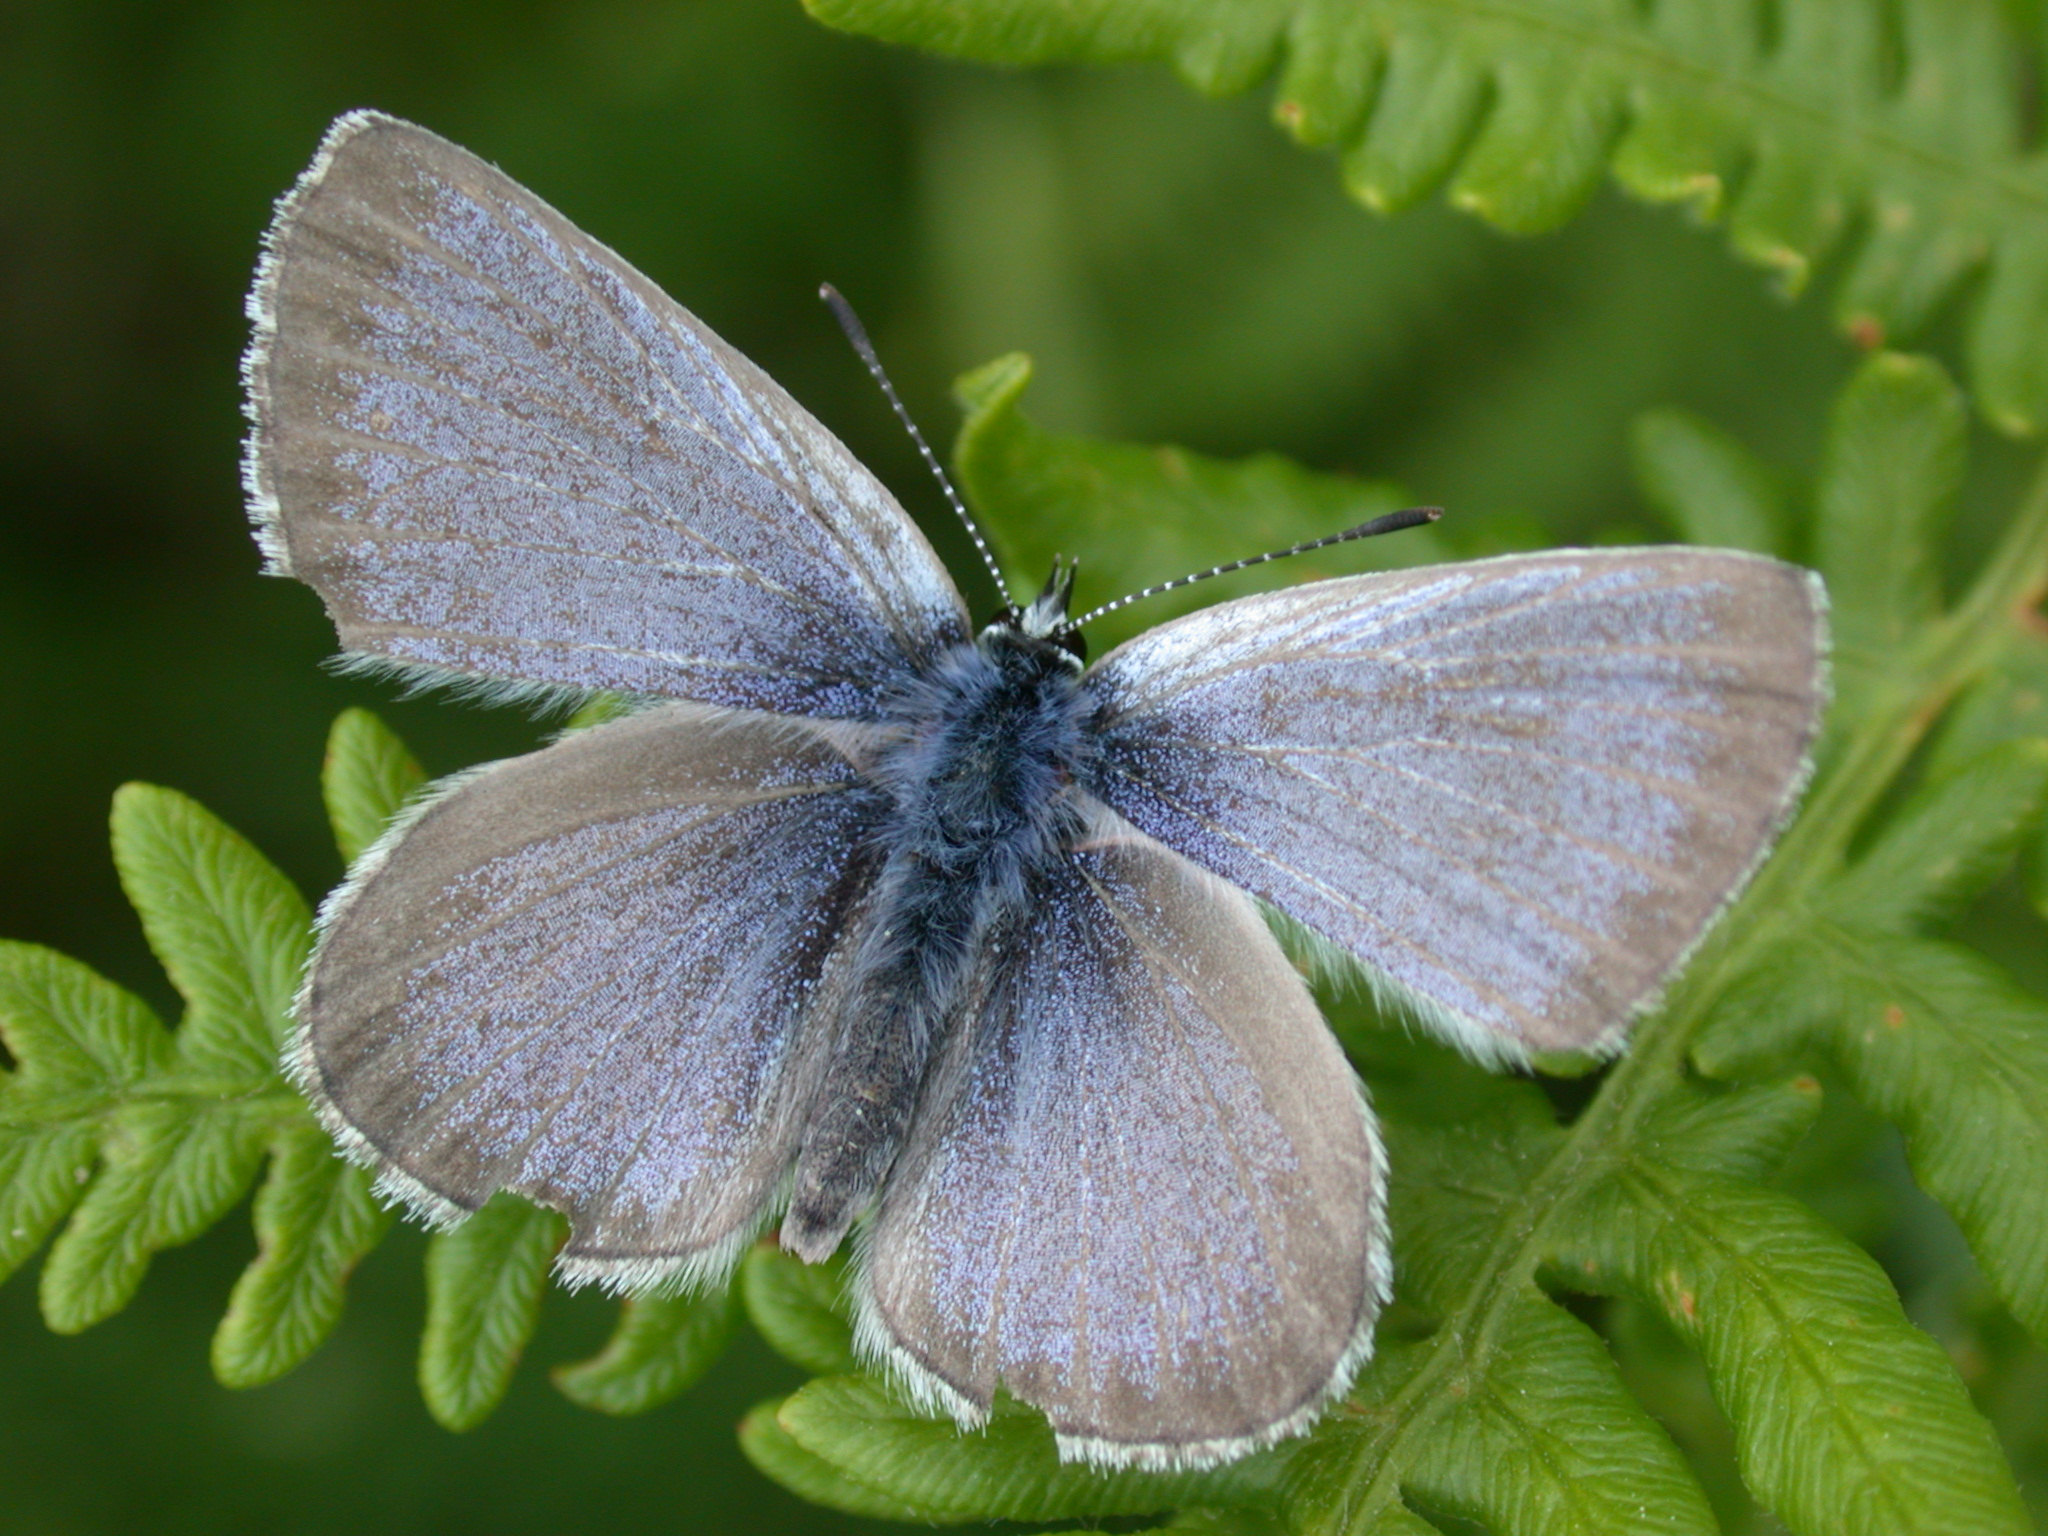 Fenderʻs blue butterfly (<i>Icaricia icarioides fenderi</i>)<br>U.S. Army Corps of Engineers